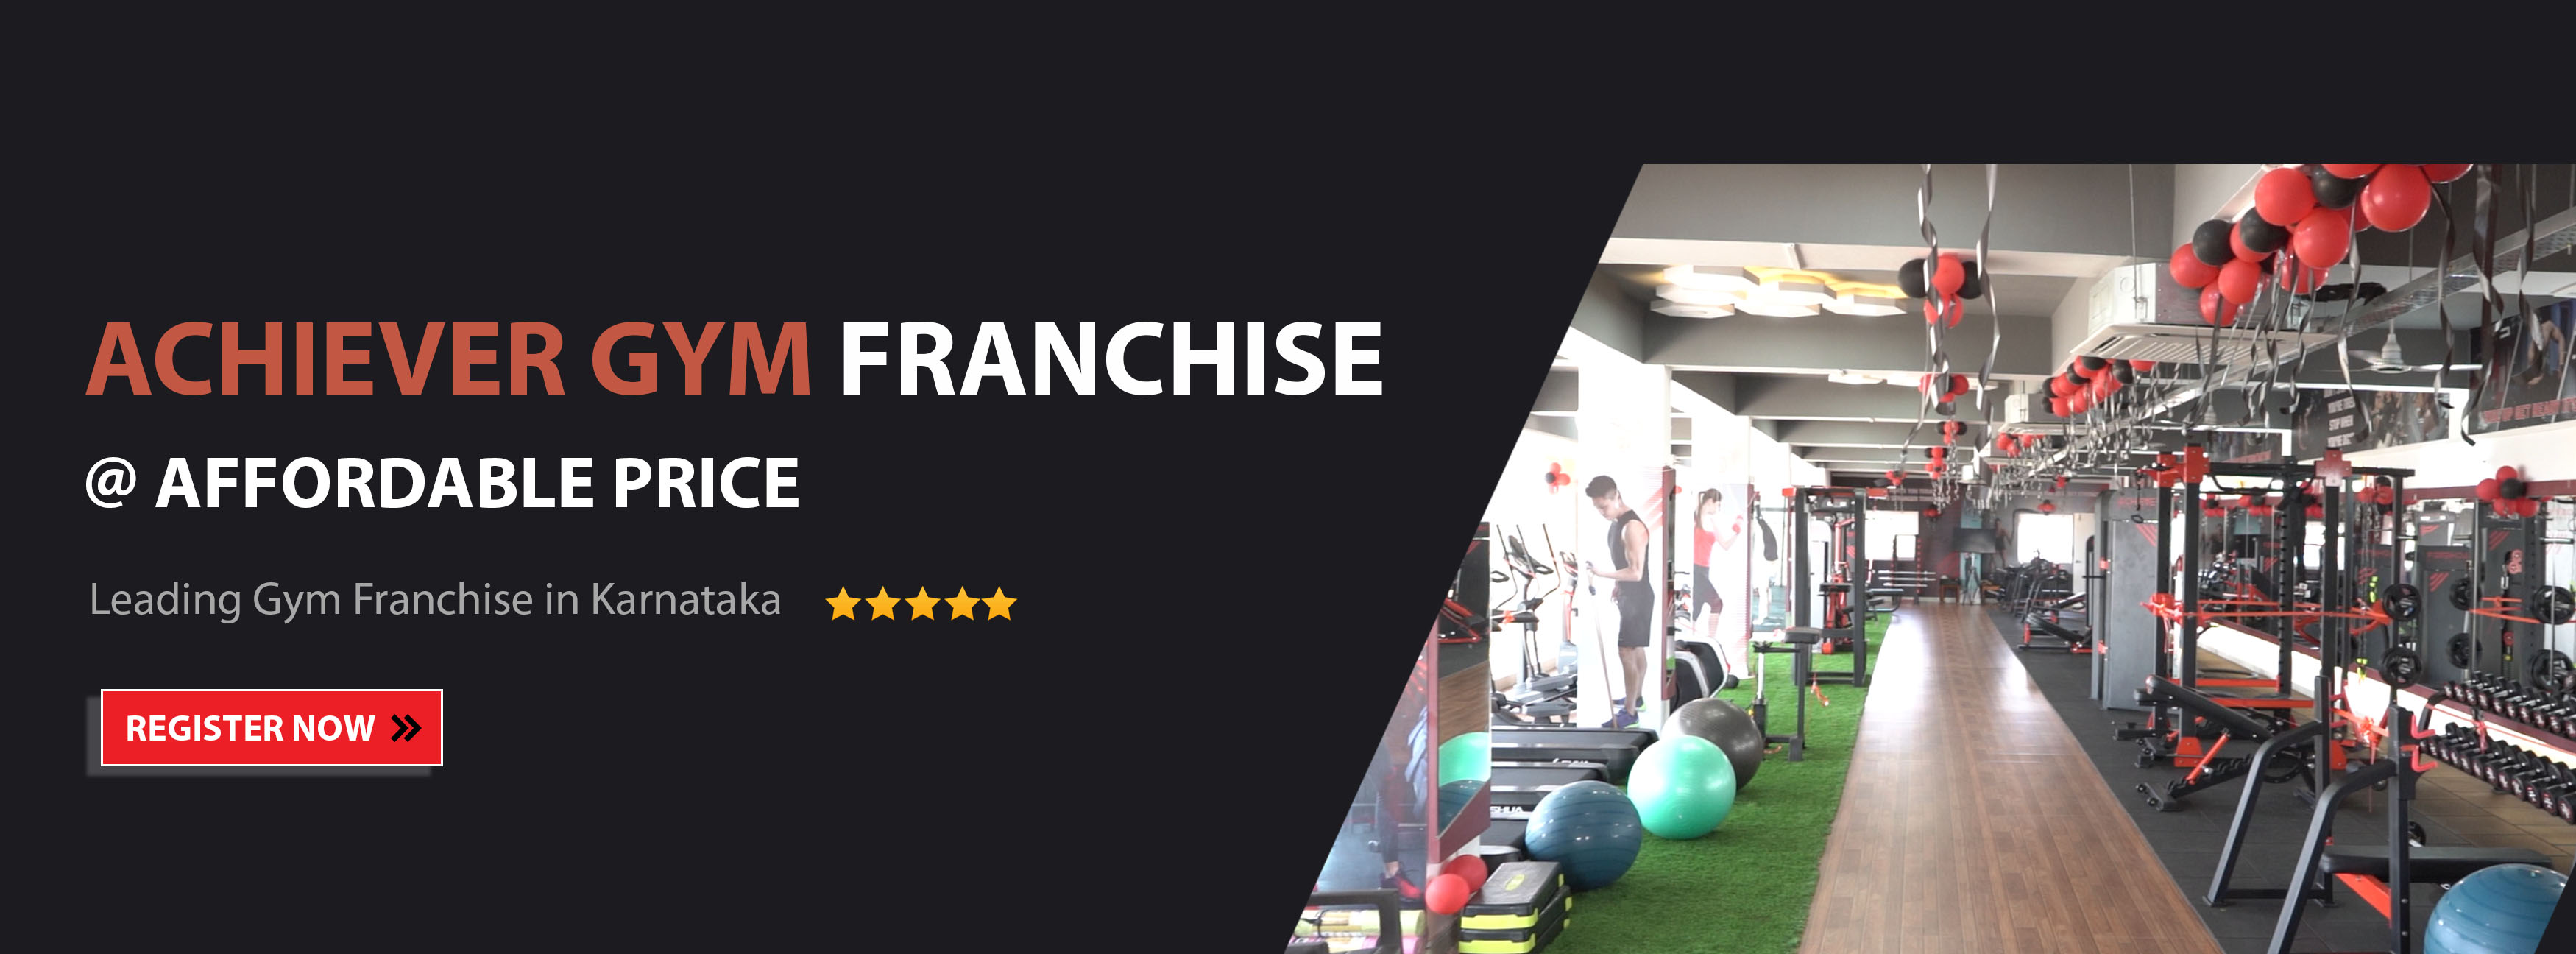 Achiever Gym Franchise at lowest price